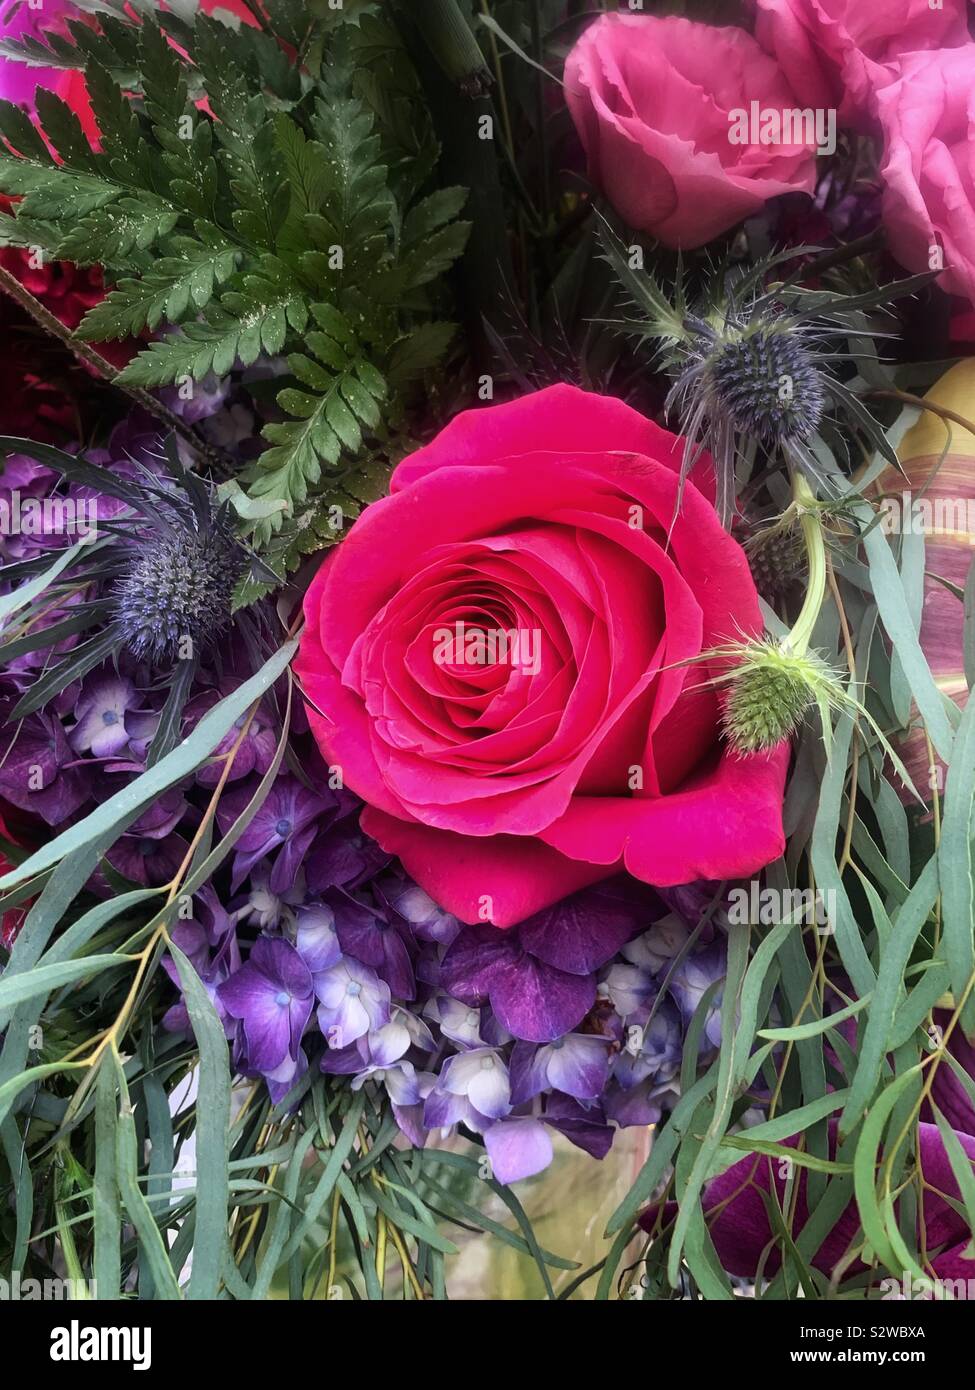 Beautiful flower arrangement with deep pink roses in full bloom. Stock Photo